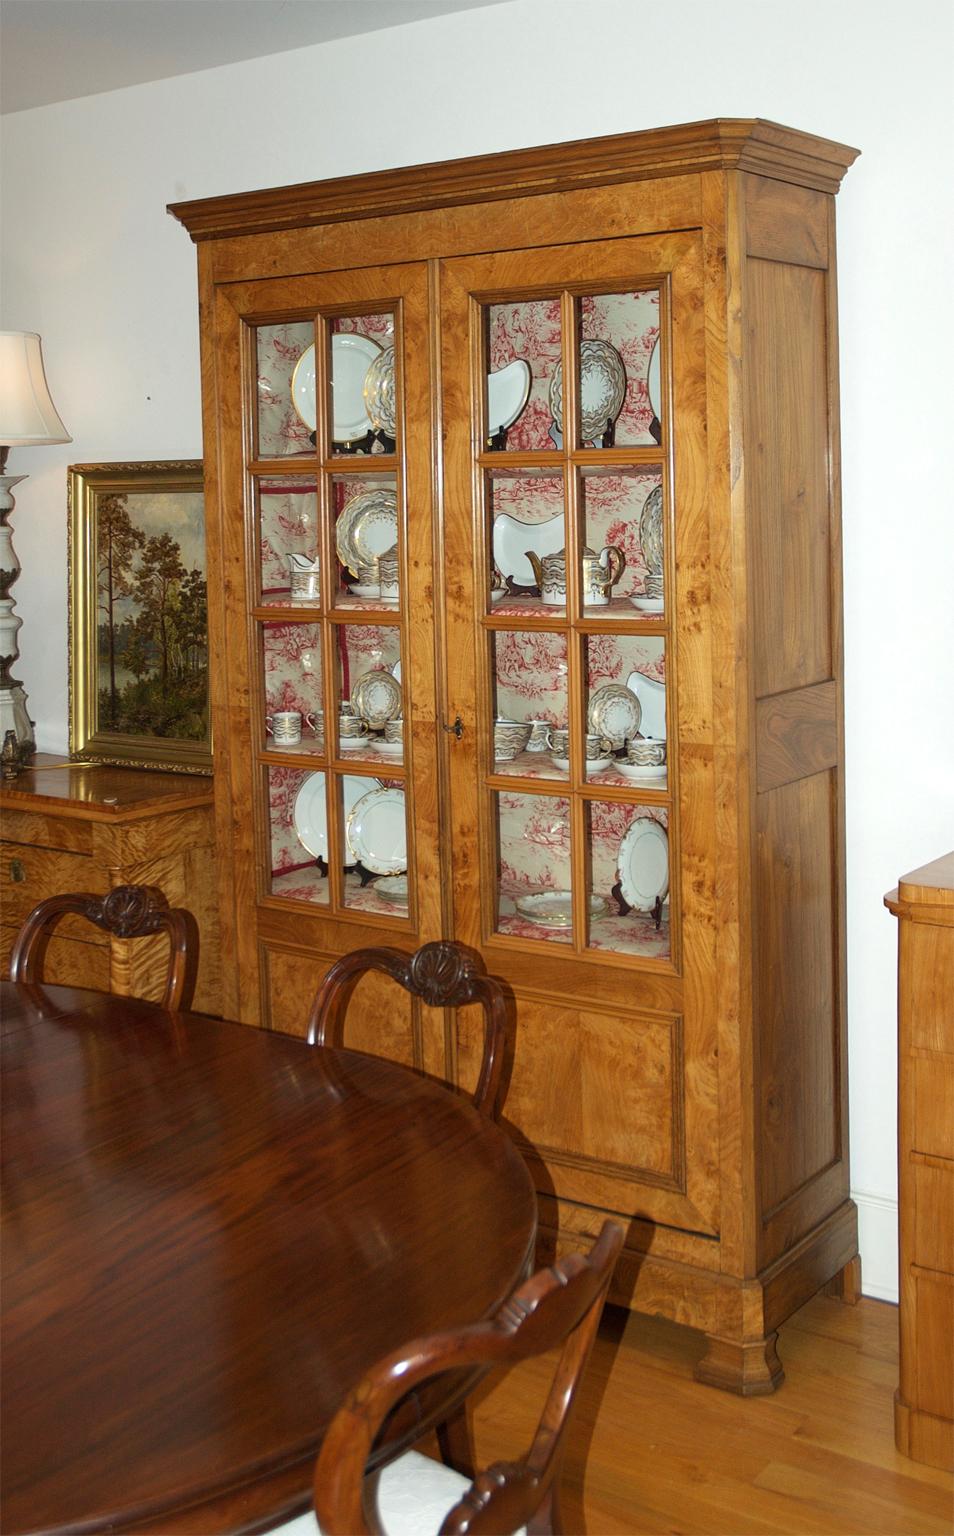 A very beautiful and expertly-crafted French Louis Philippe cupboard or bookcase in chestnut with mullioned glass panels. Made of solid chestnut with lovely graining and small burled eyes, cabinet offers four fixed shelves, original hardware and